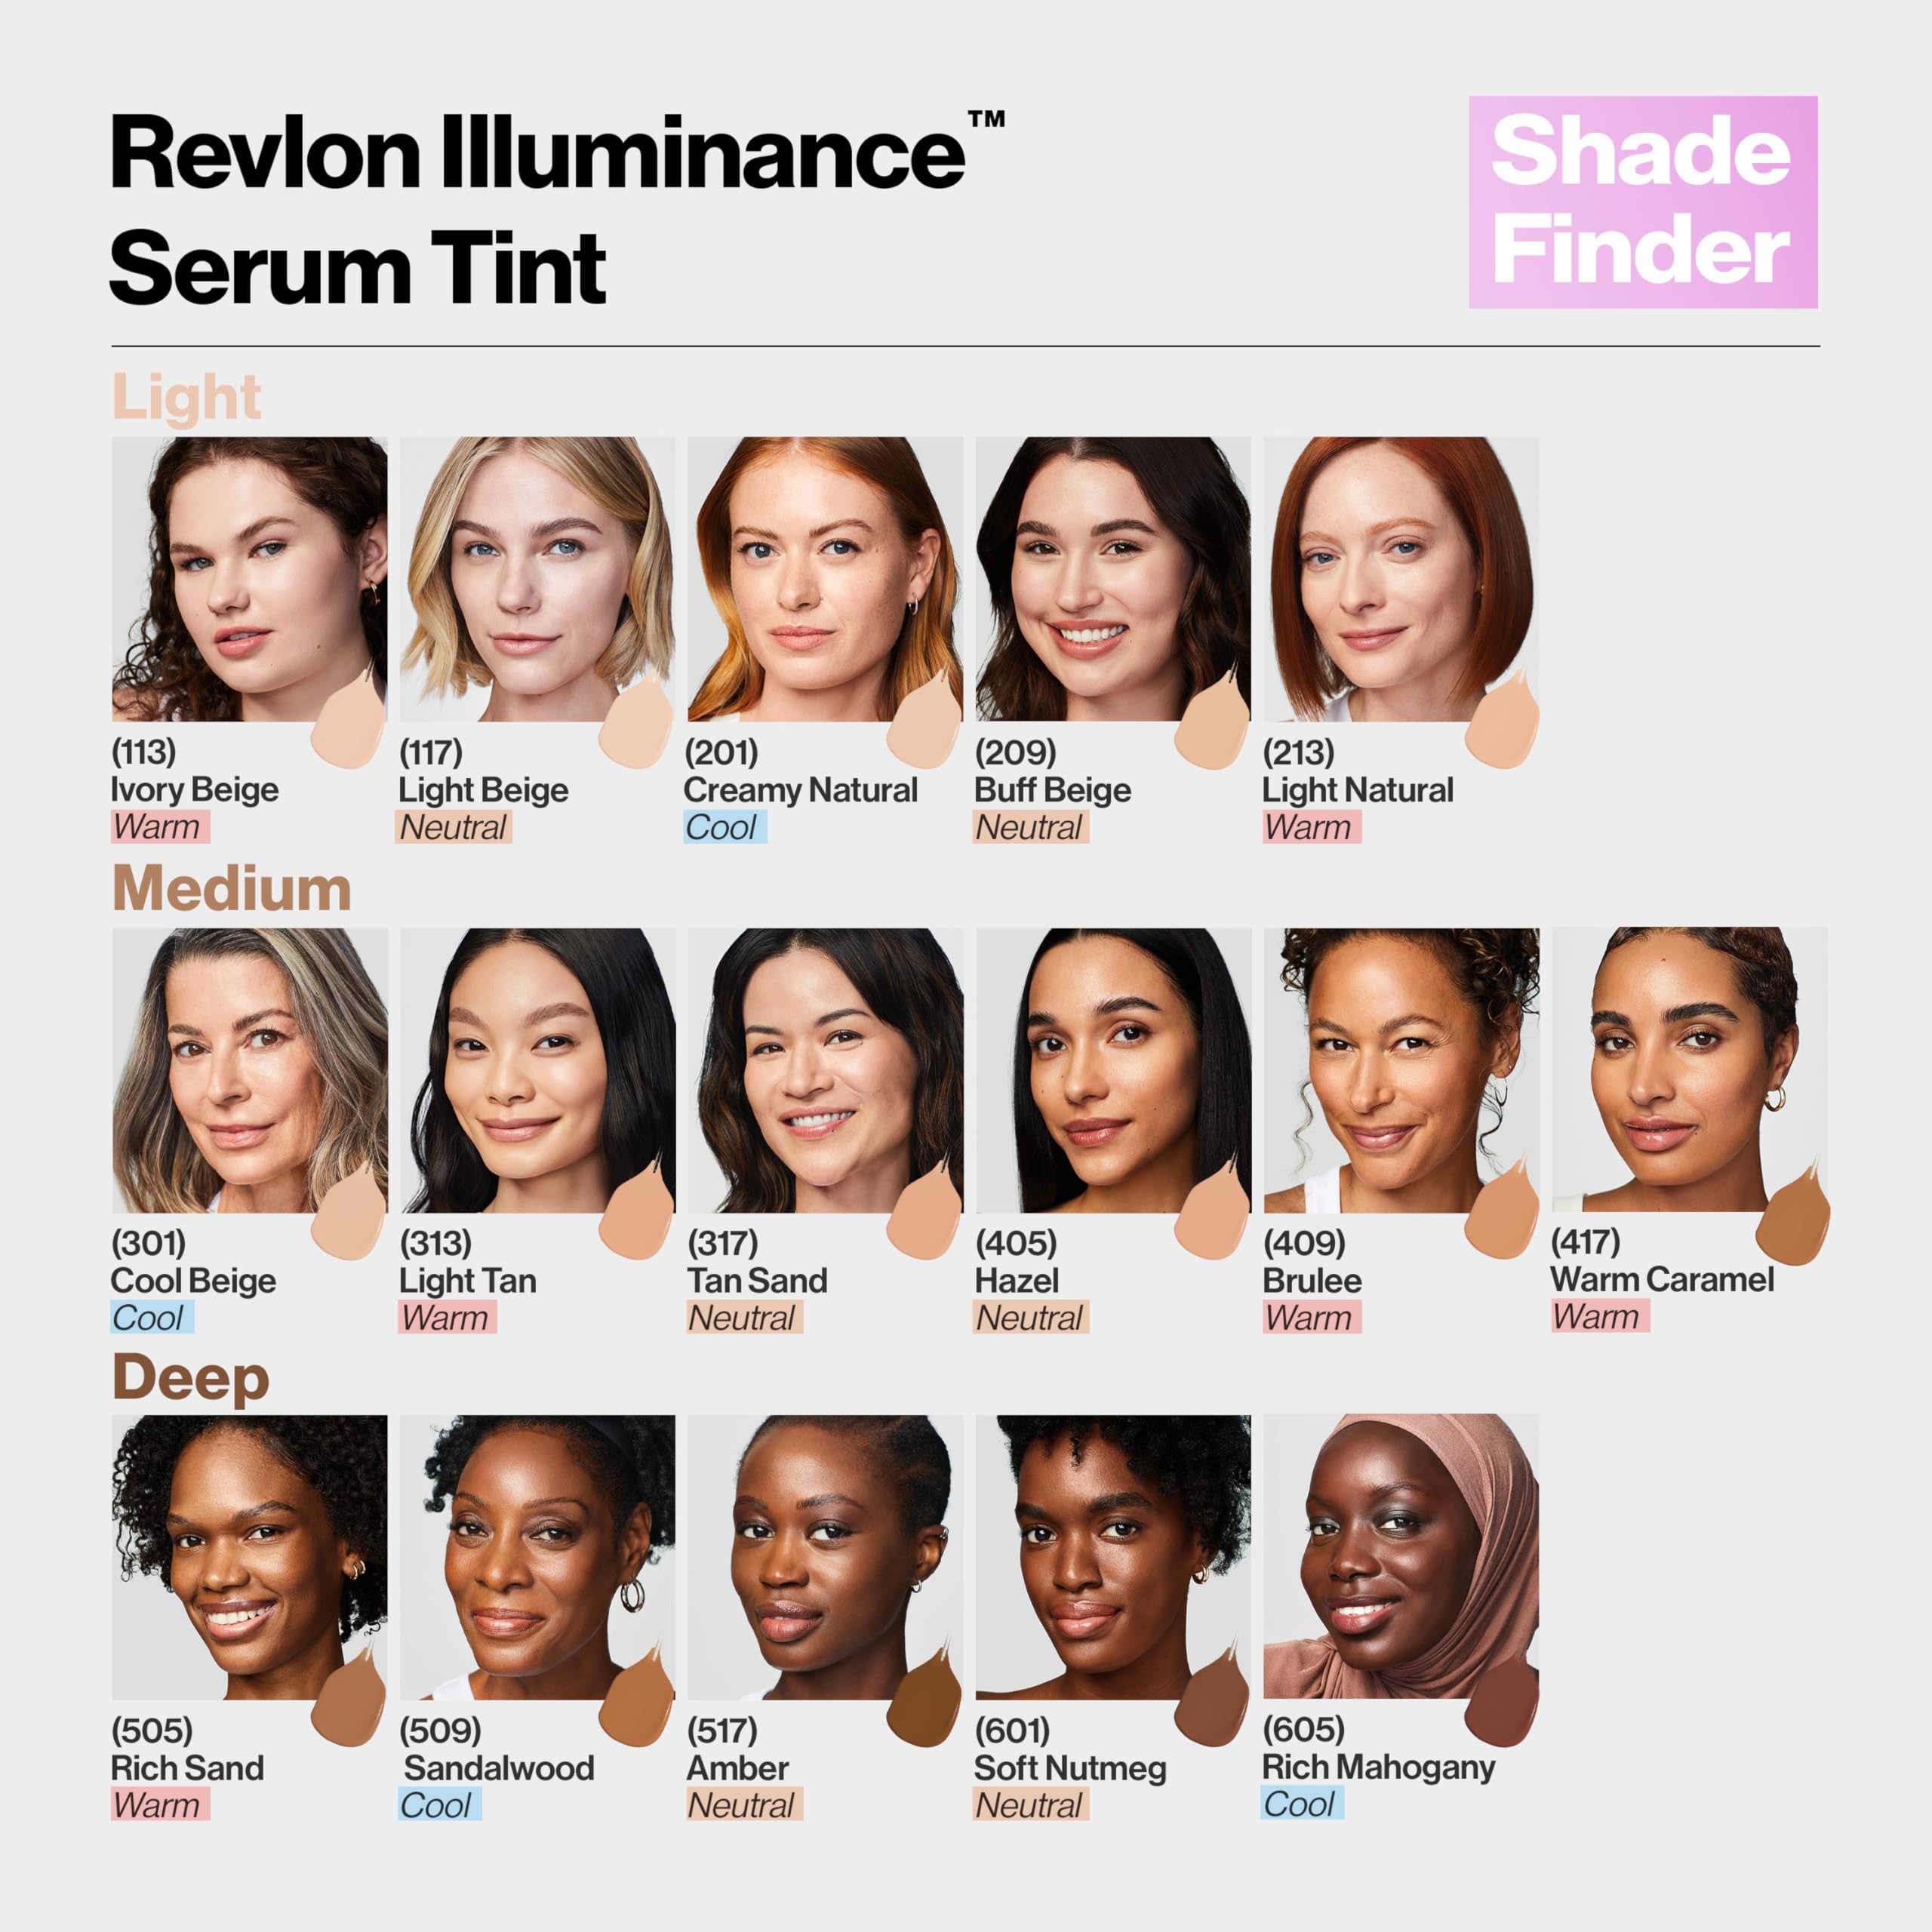 Revlon Illuminance Tinted Serum, Triple Hyaluronic Acid, Evens Out Skin Tone Over Time and Hydrates All Day, SPF 15, 213 Light Natural, 0.94 fl oz.